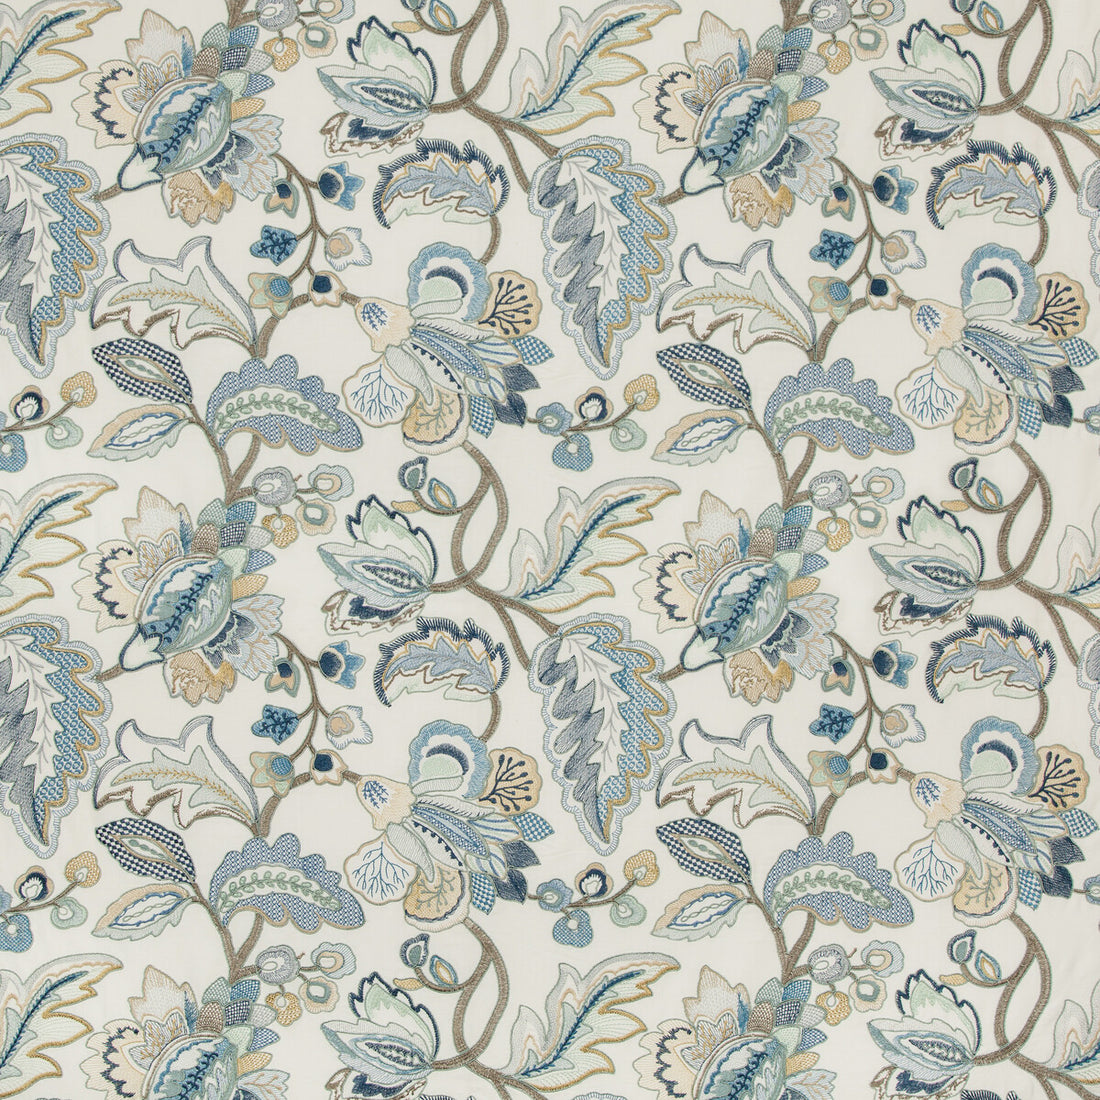 Orford Embroidery fabric in blue/gold color - pattern 2019111.145.0 - by Lee Jofa in the Manor House collection